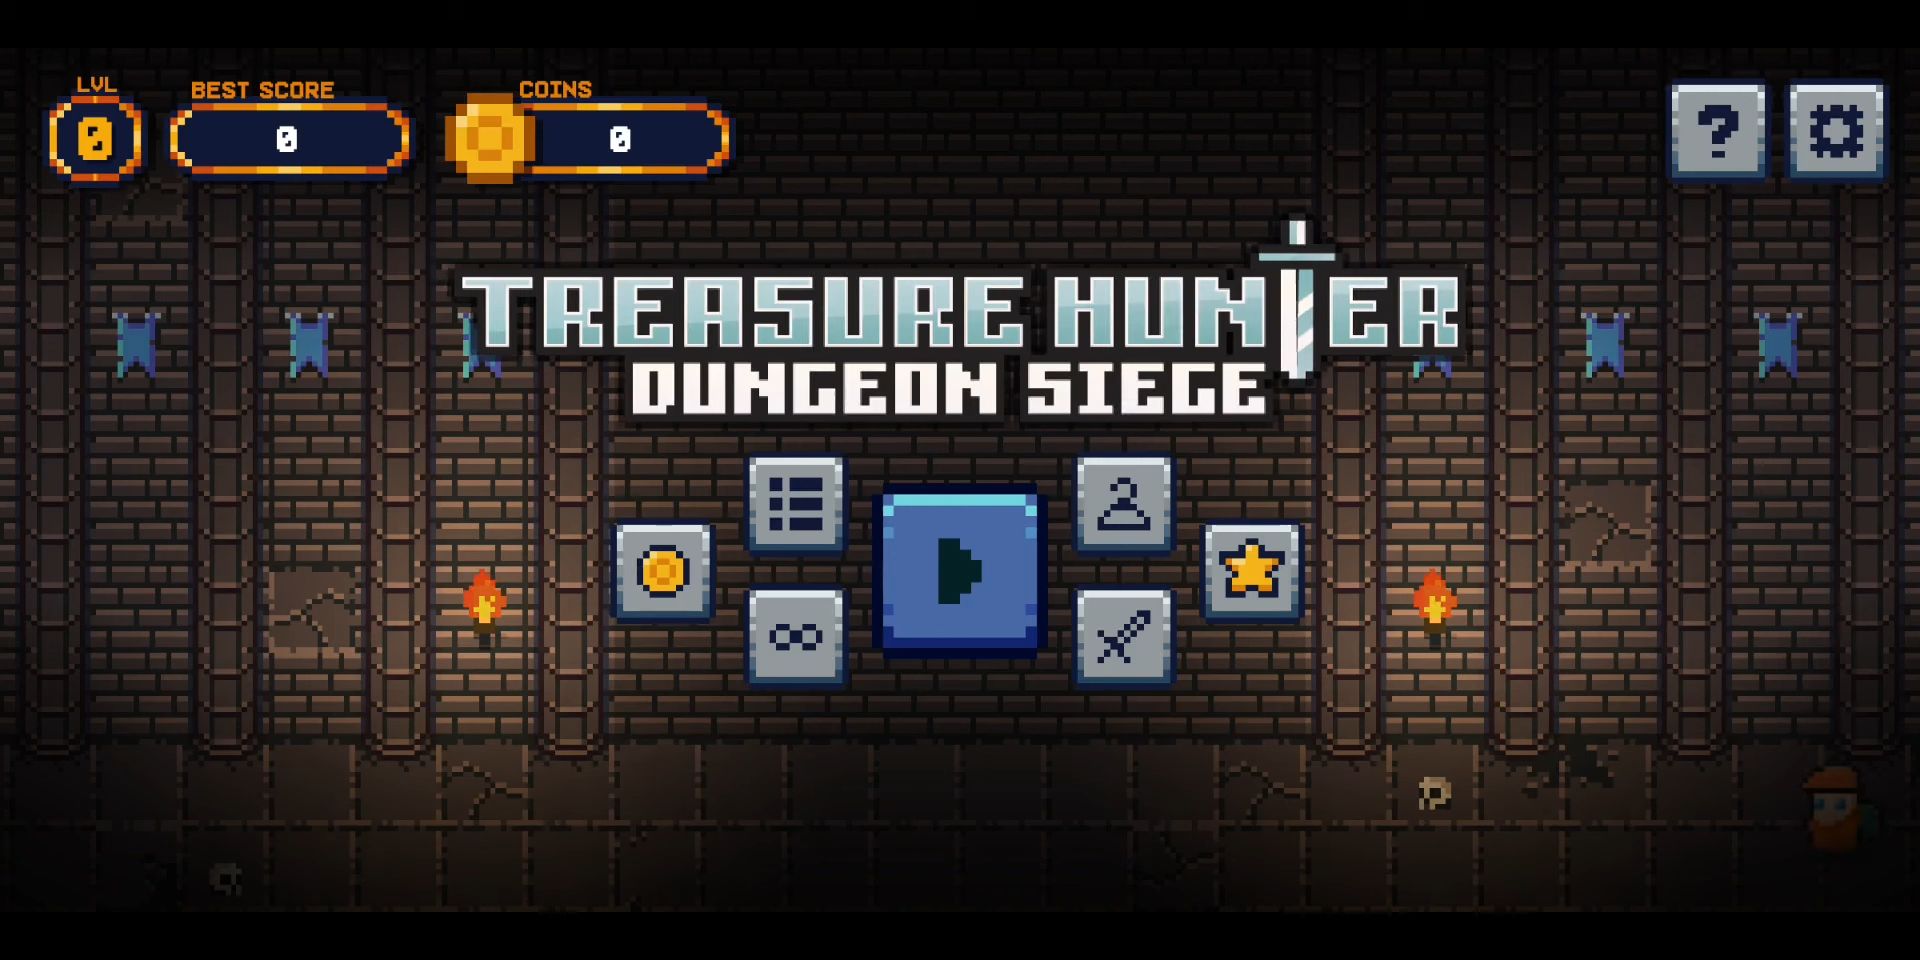 Full version of Android Pixel art game apk Treasure Hunter: Dungeon Siege for tablet and phone.